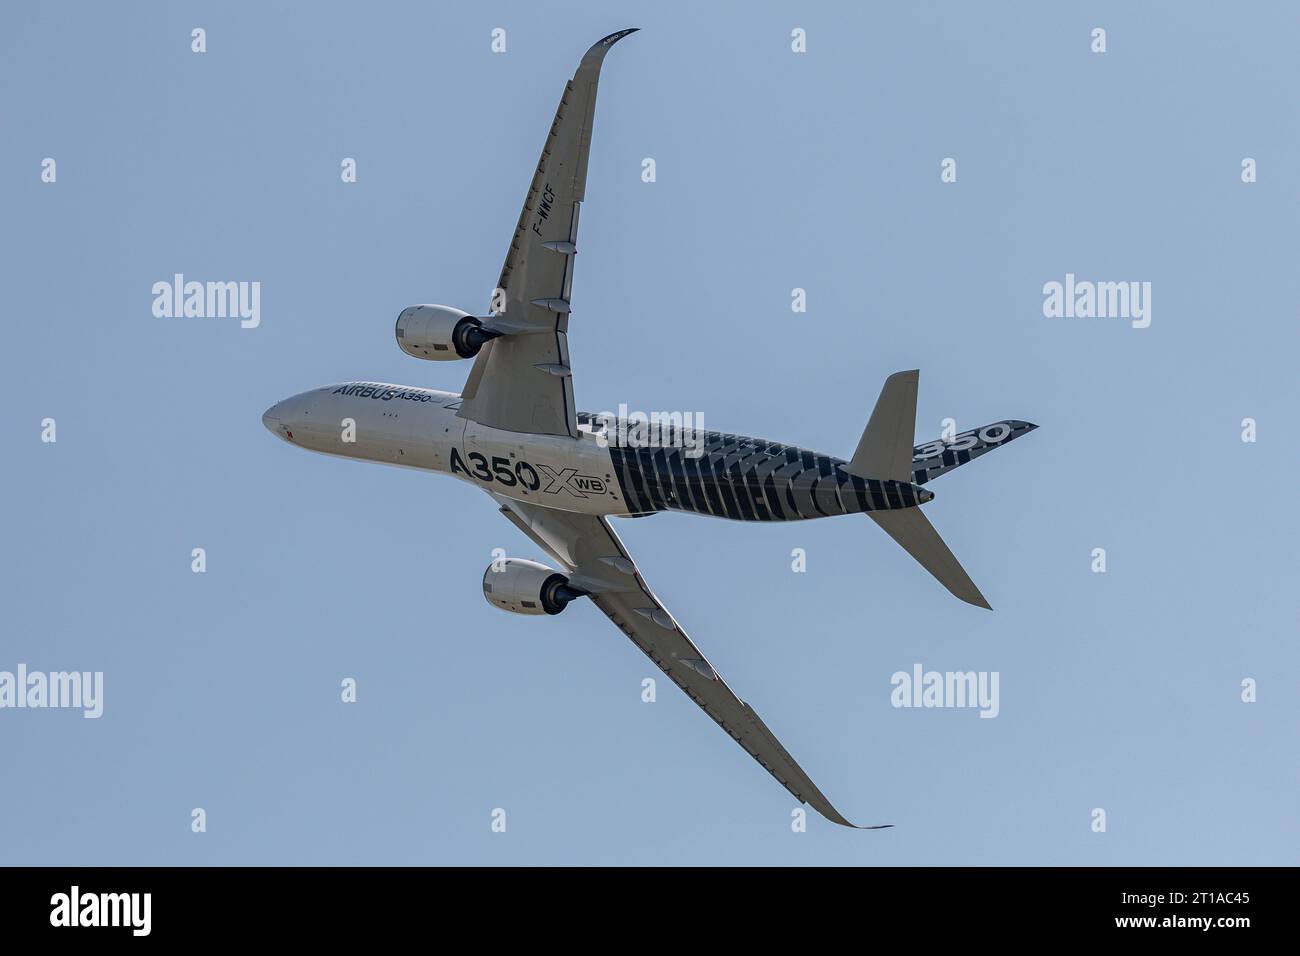 New Airbus A350 XWB passenger plane performing at the Berlin ILA Air Show, Berlin Stock Photo